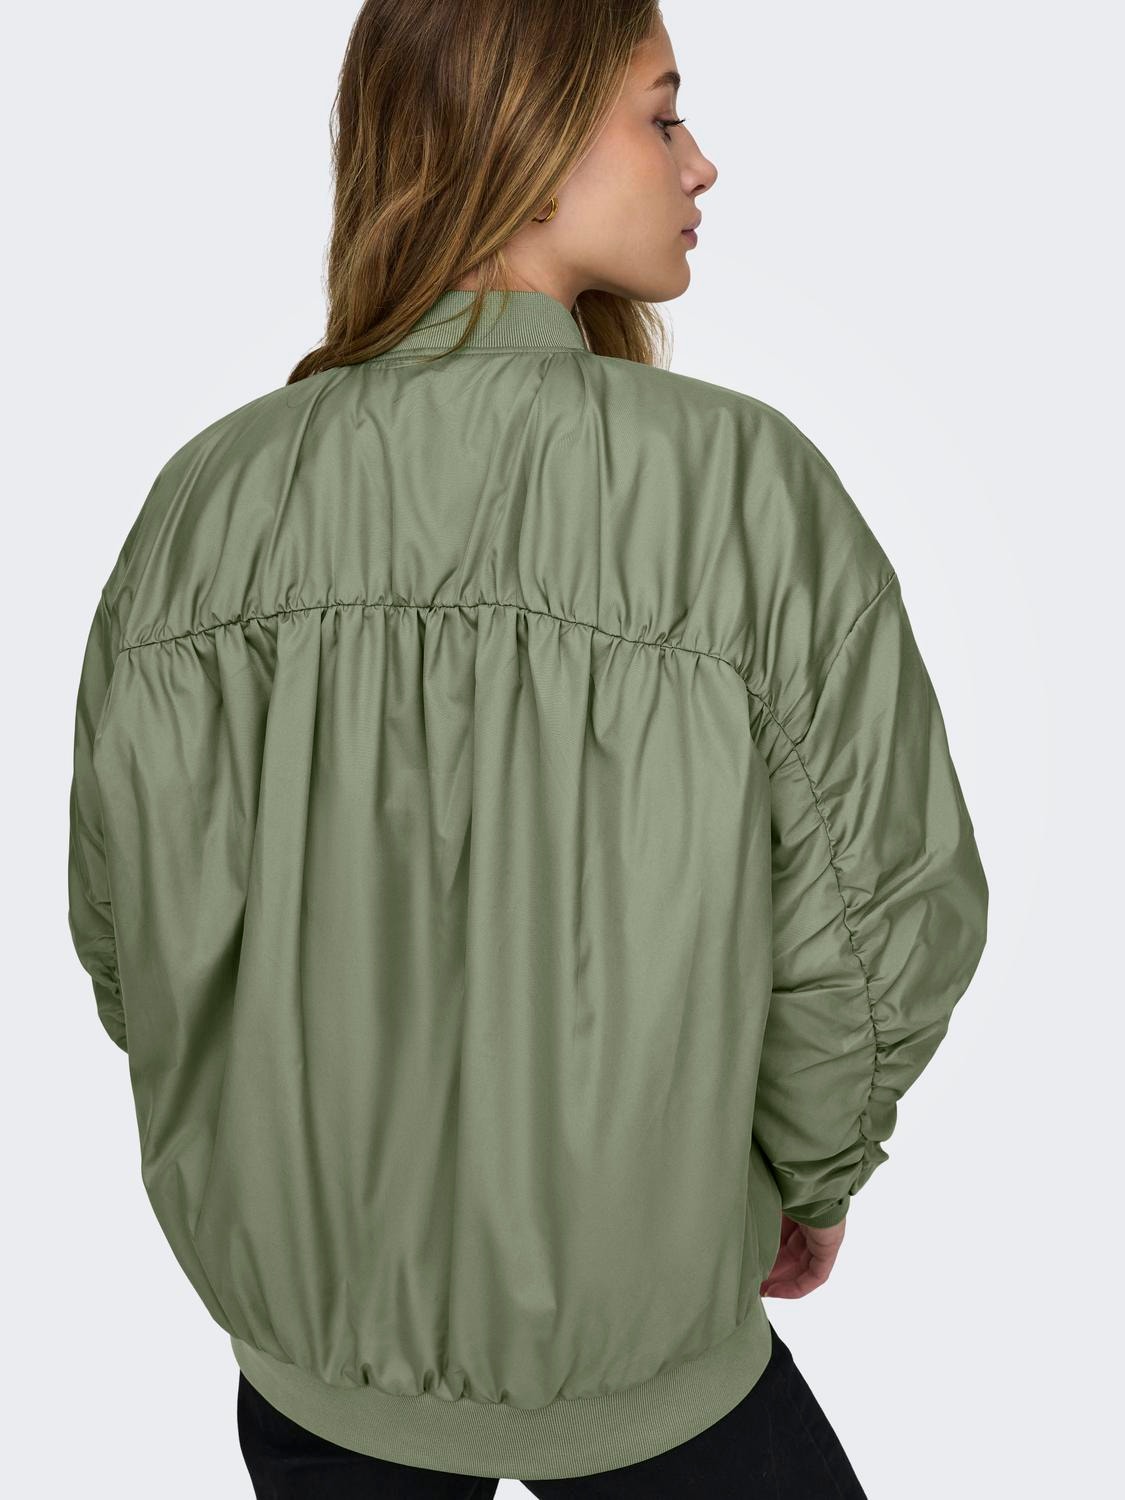 ONLY Round Neck Rib hems Ribbed cuffs Jacket -Oil Green - 15317137